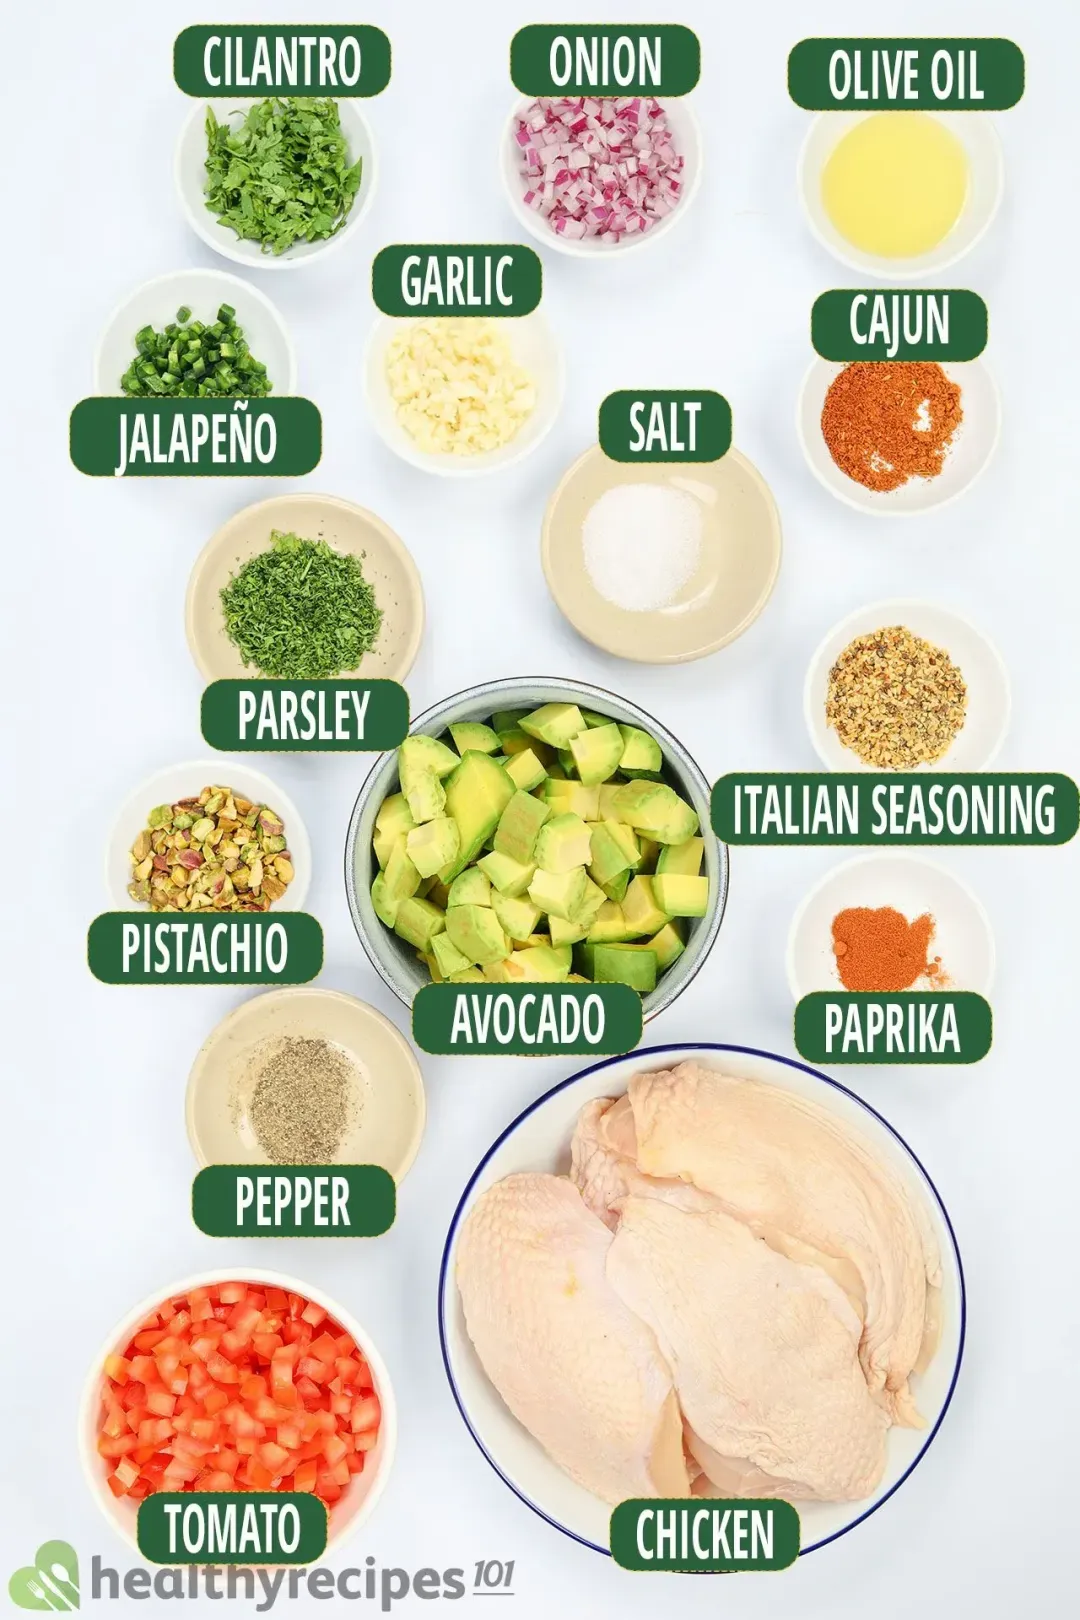 ingedients for chicken with avocado salsa